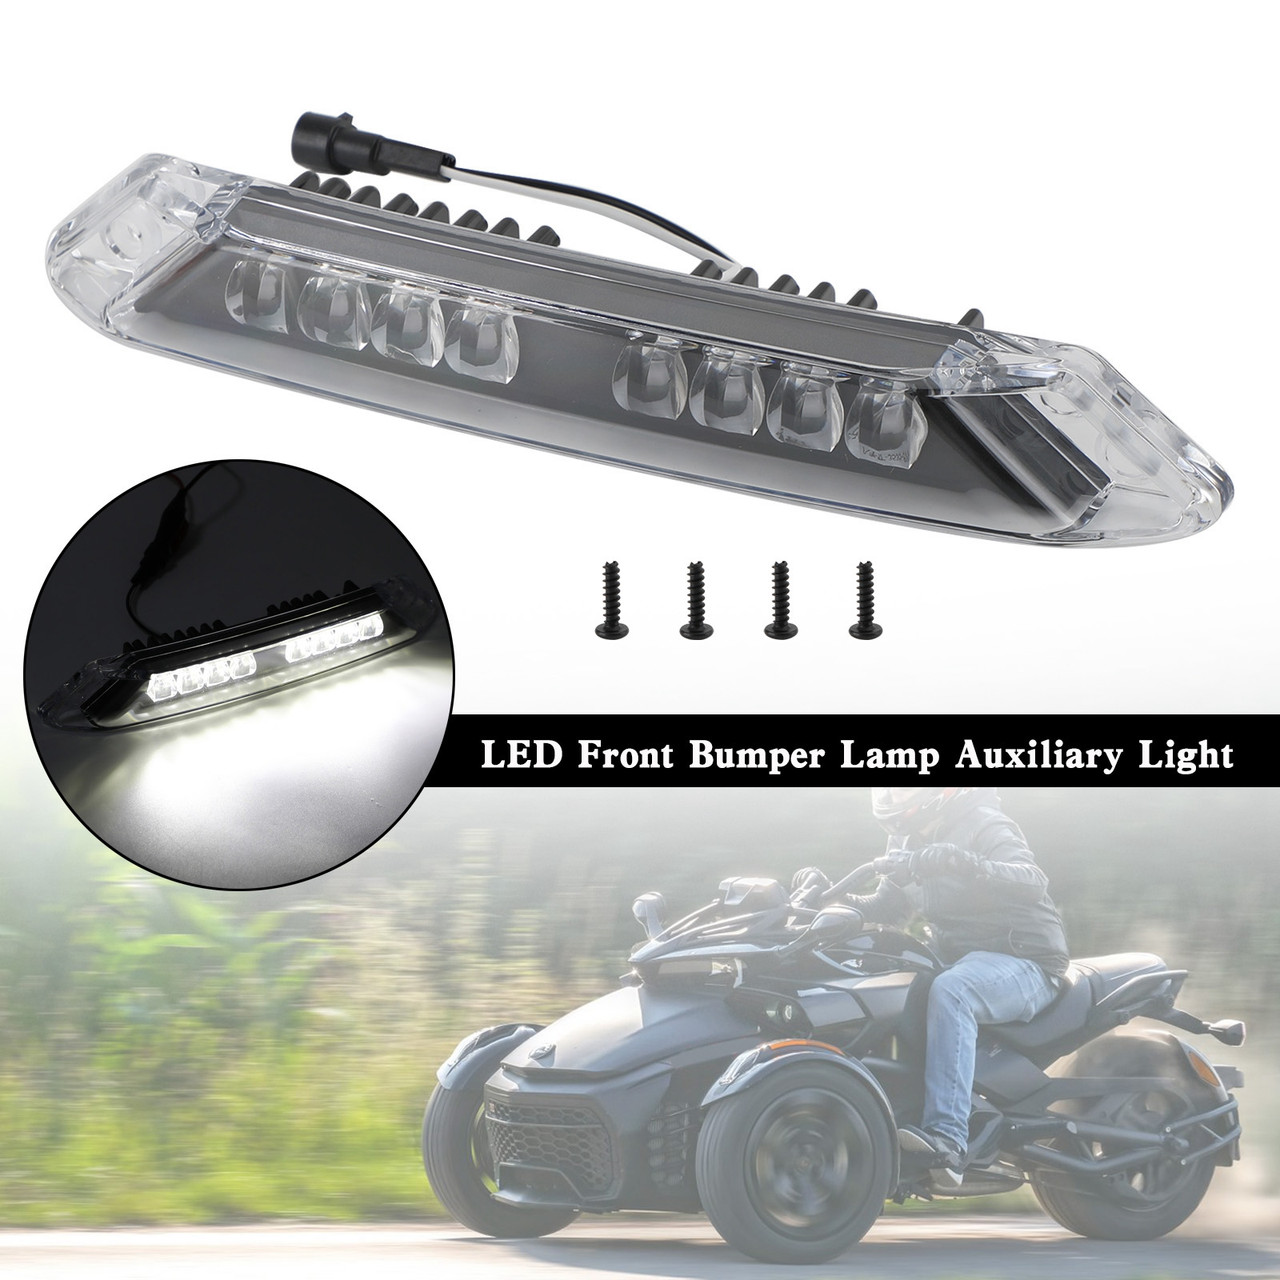 LED 219400991 Front Bumper Lamp Auxiliary Light Can-Am Spyder RT 2020-2023